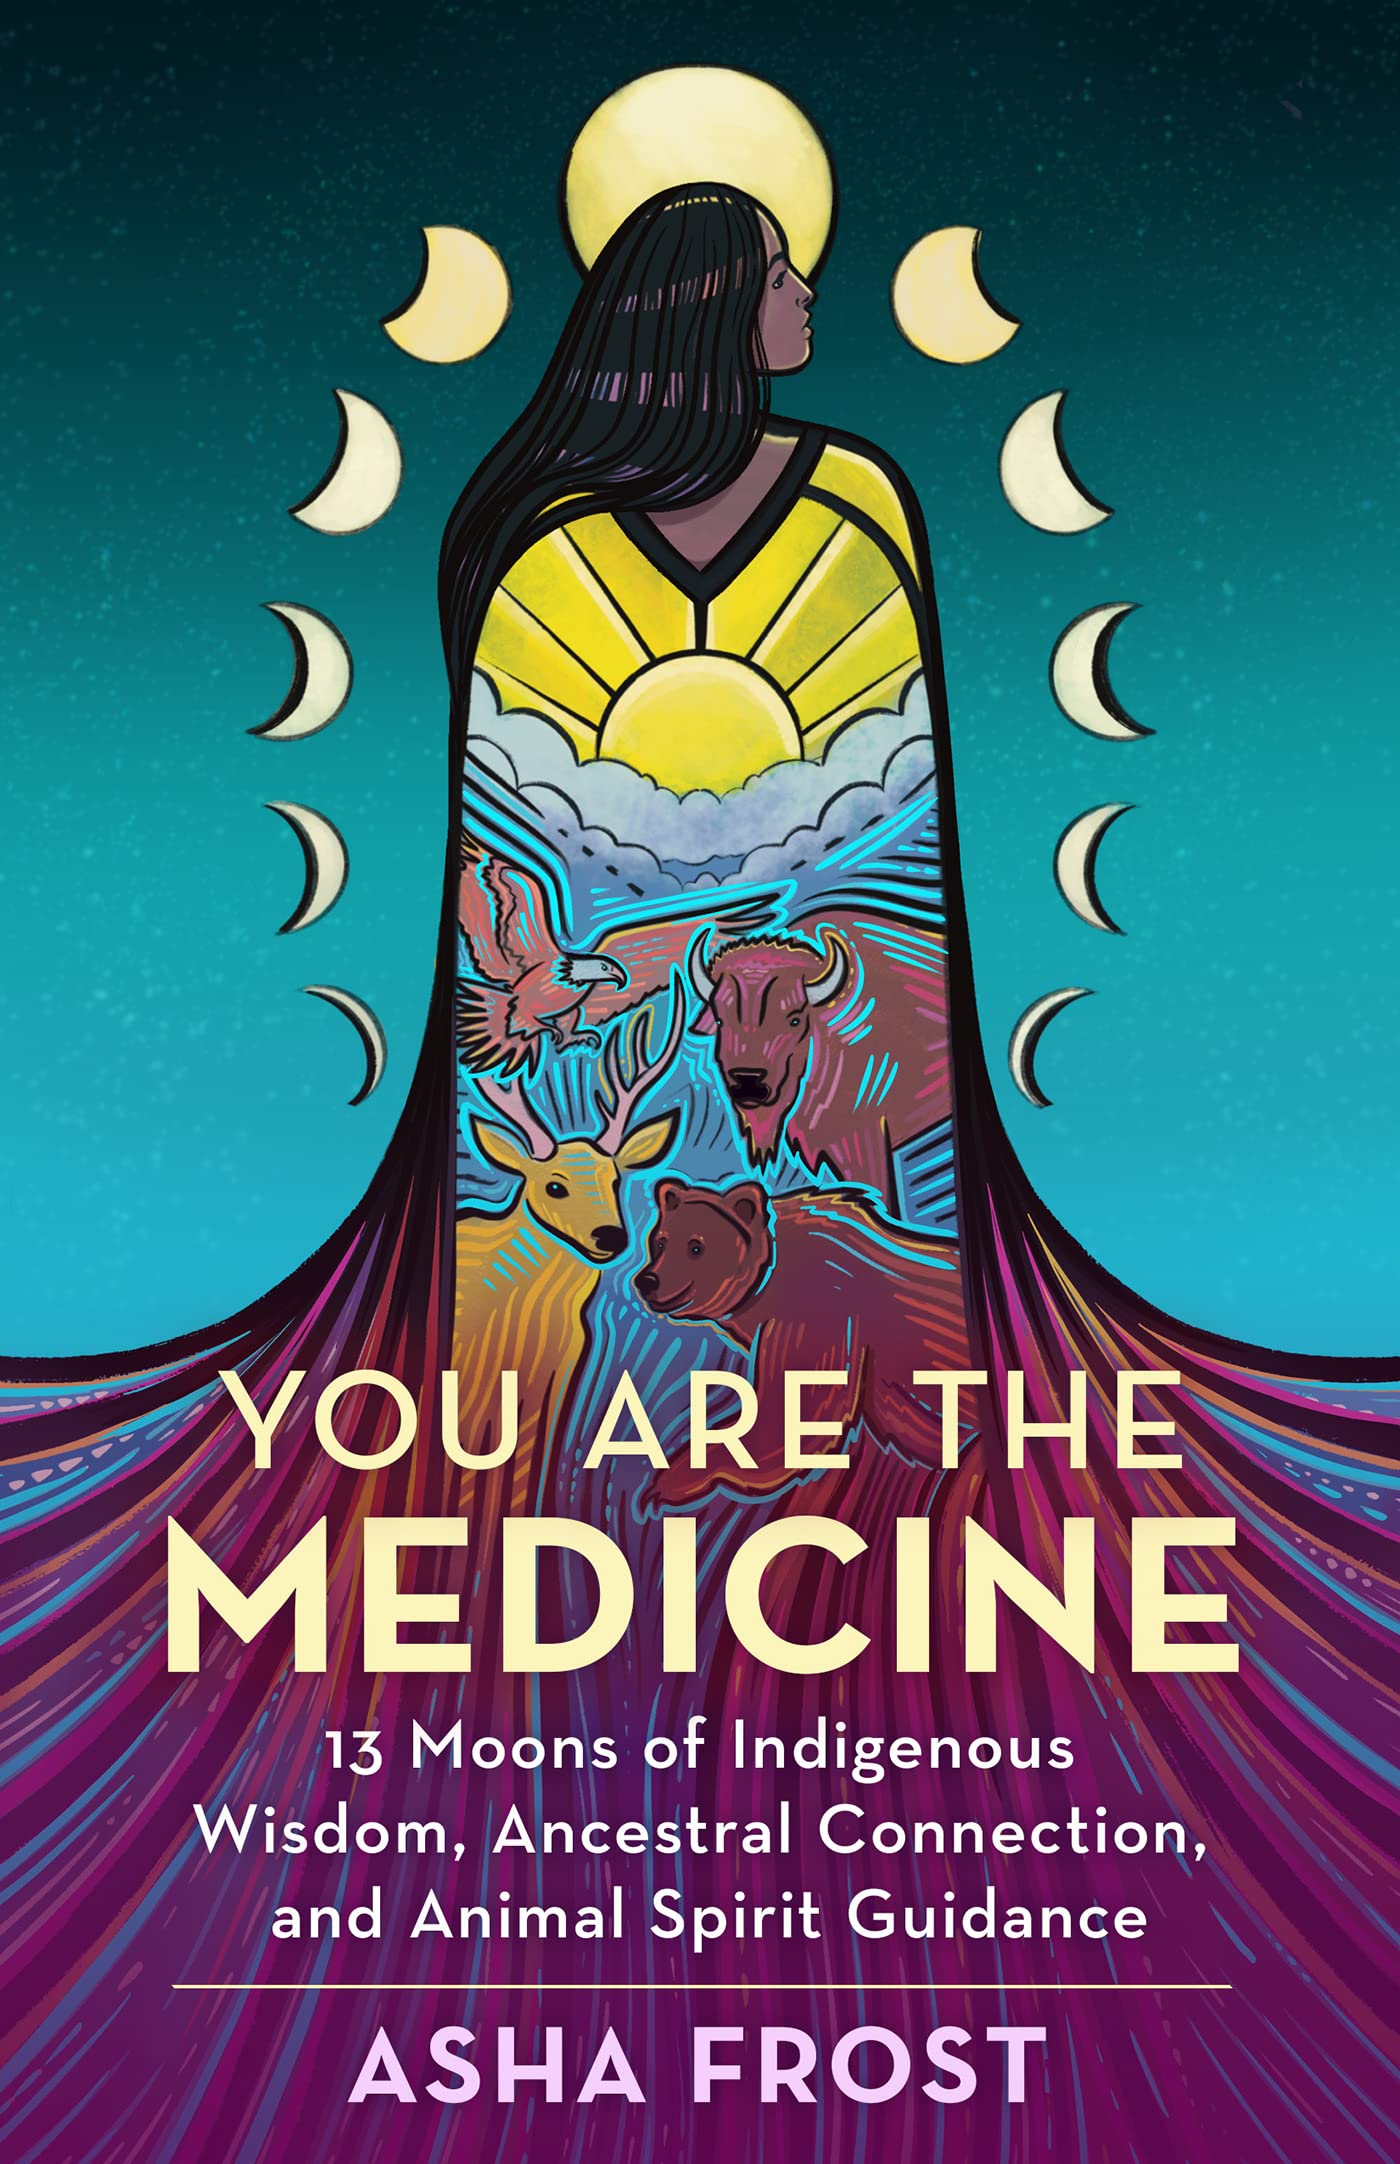 You Are the Medicine // 13 Moons of Indigenous Wisdom, Ancestral Connection, and Animal Spirit Guidance